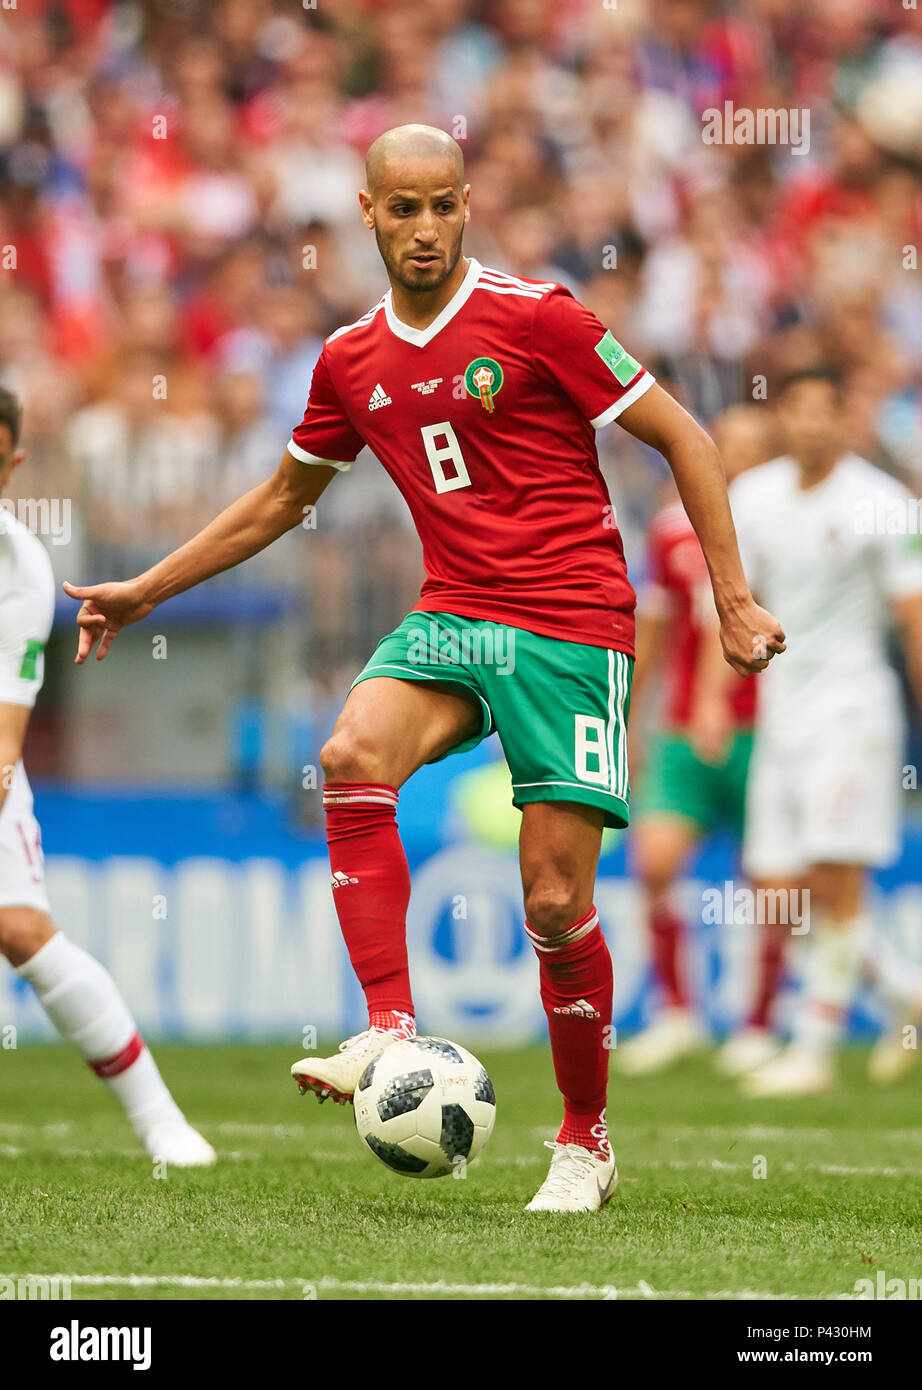 Moscow, Russia. 20th June, 2018. Portugal - Morocco, Soccer, Moscow, June  20, 2018 Karim EL AHMADI, Morocco Nr.8 drives, controls the ball, action,  full-size, Single action with ball, full body, whole figure,